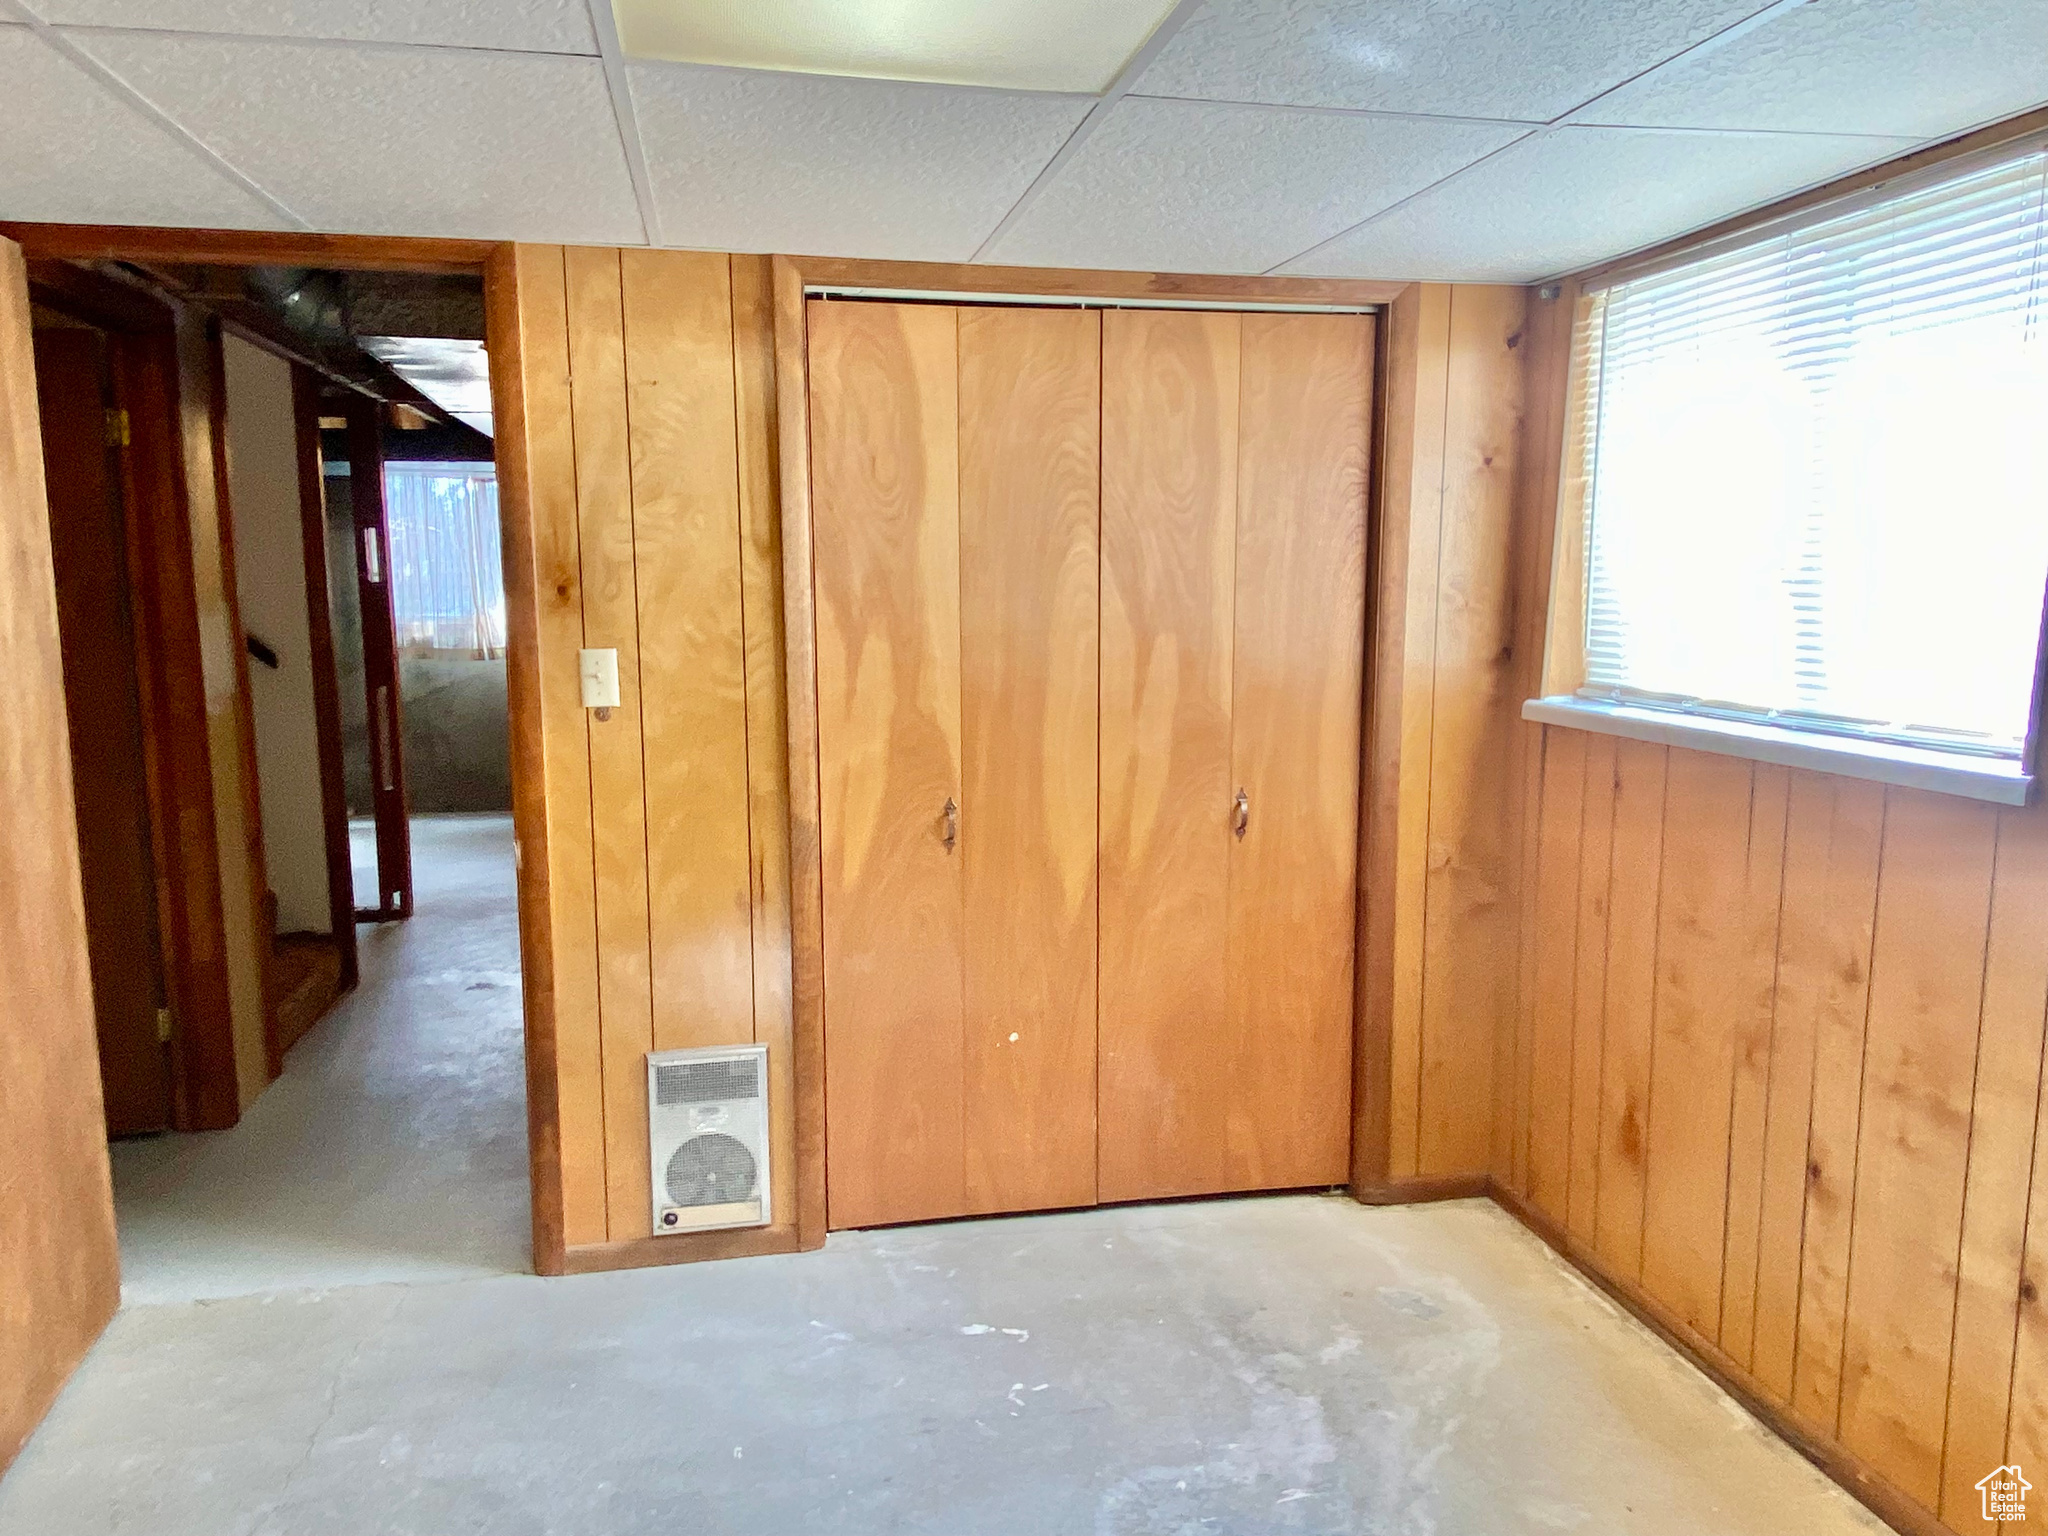 Unfurnished bedroom with wood walls, a closet, and a paneled ceiling